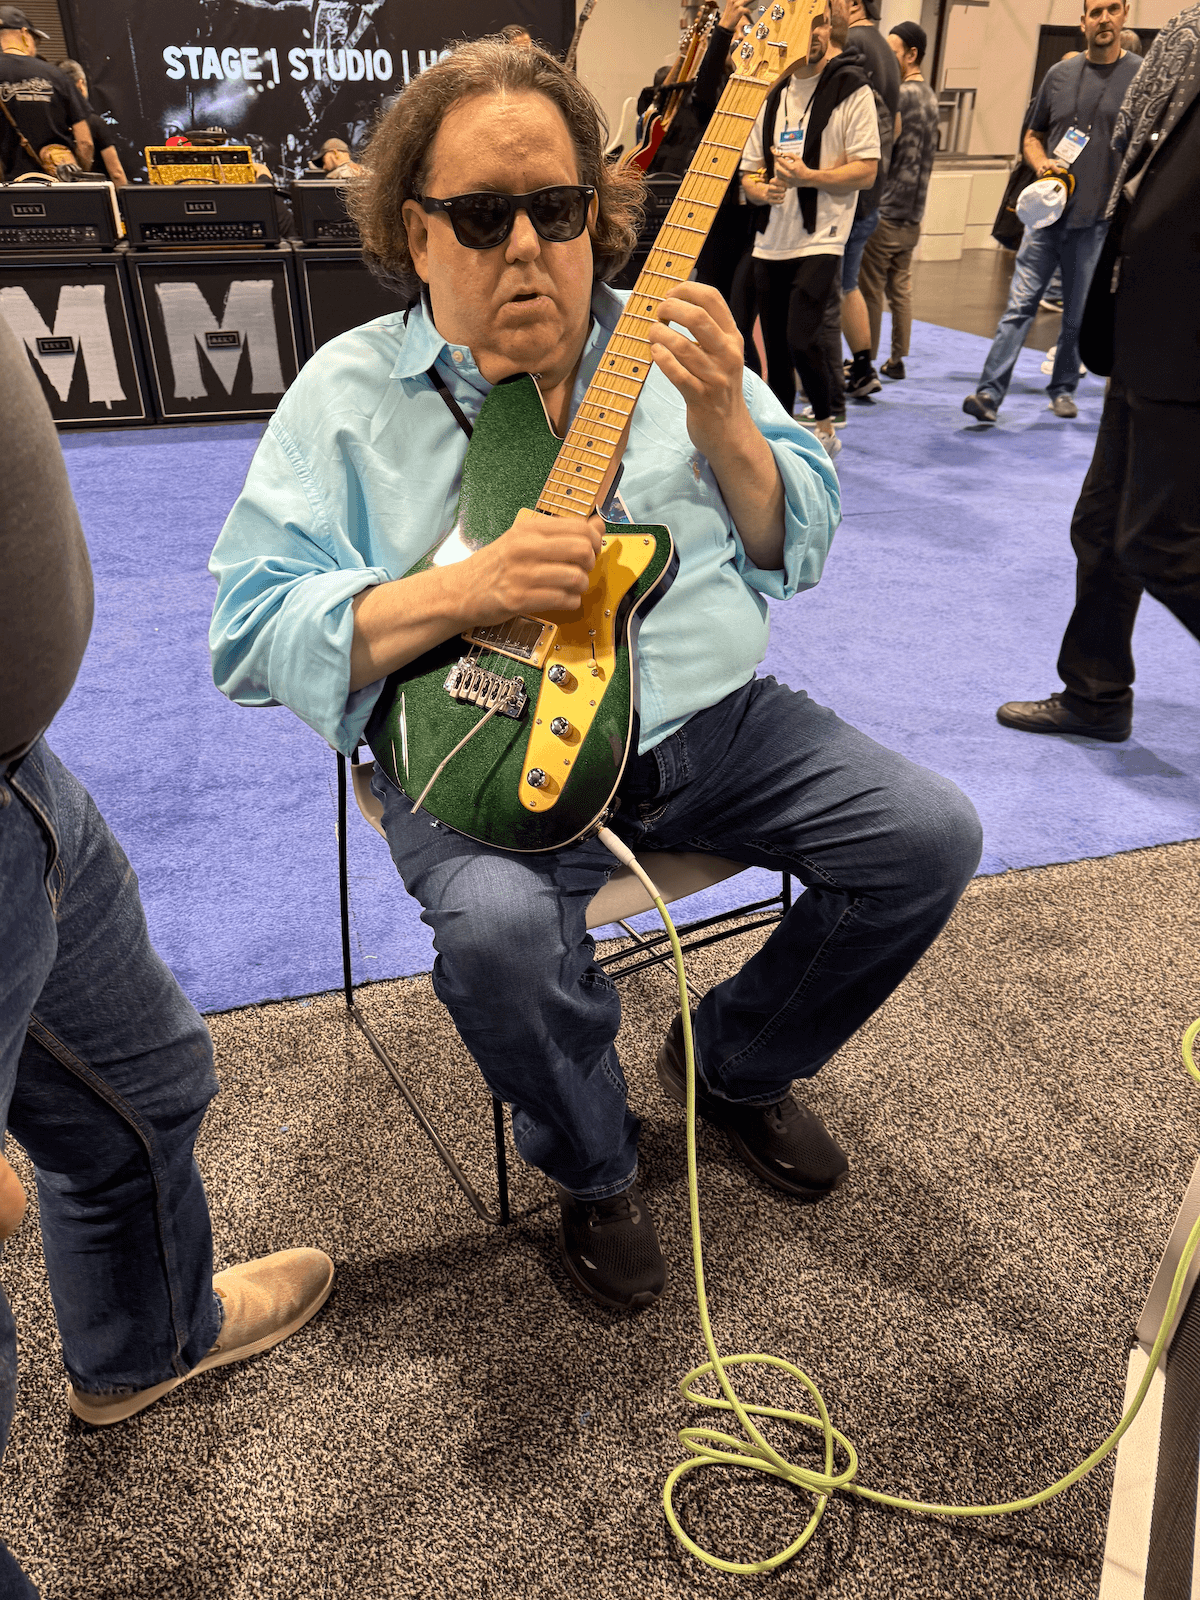 Joey playing Reverend gtr at NAMM24